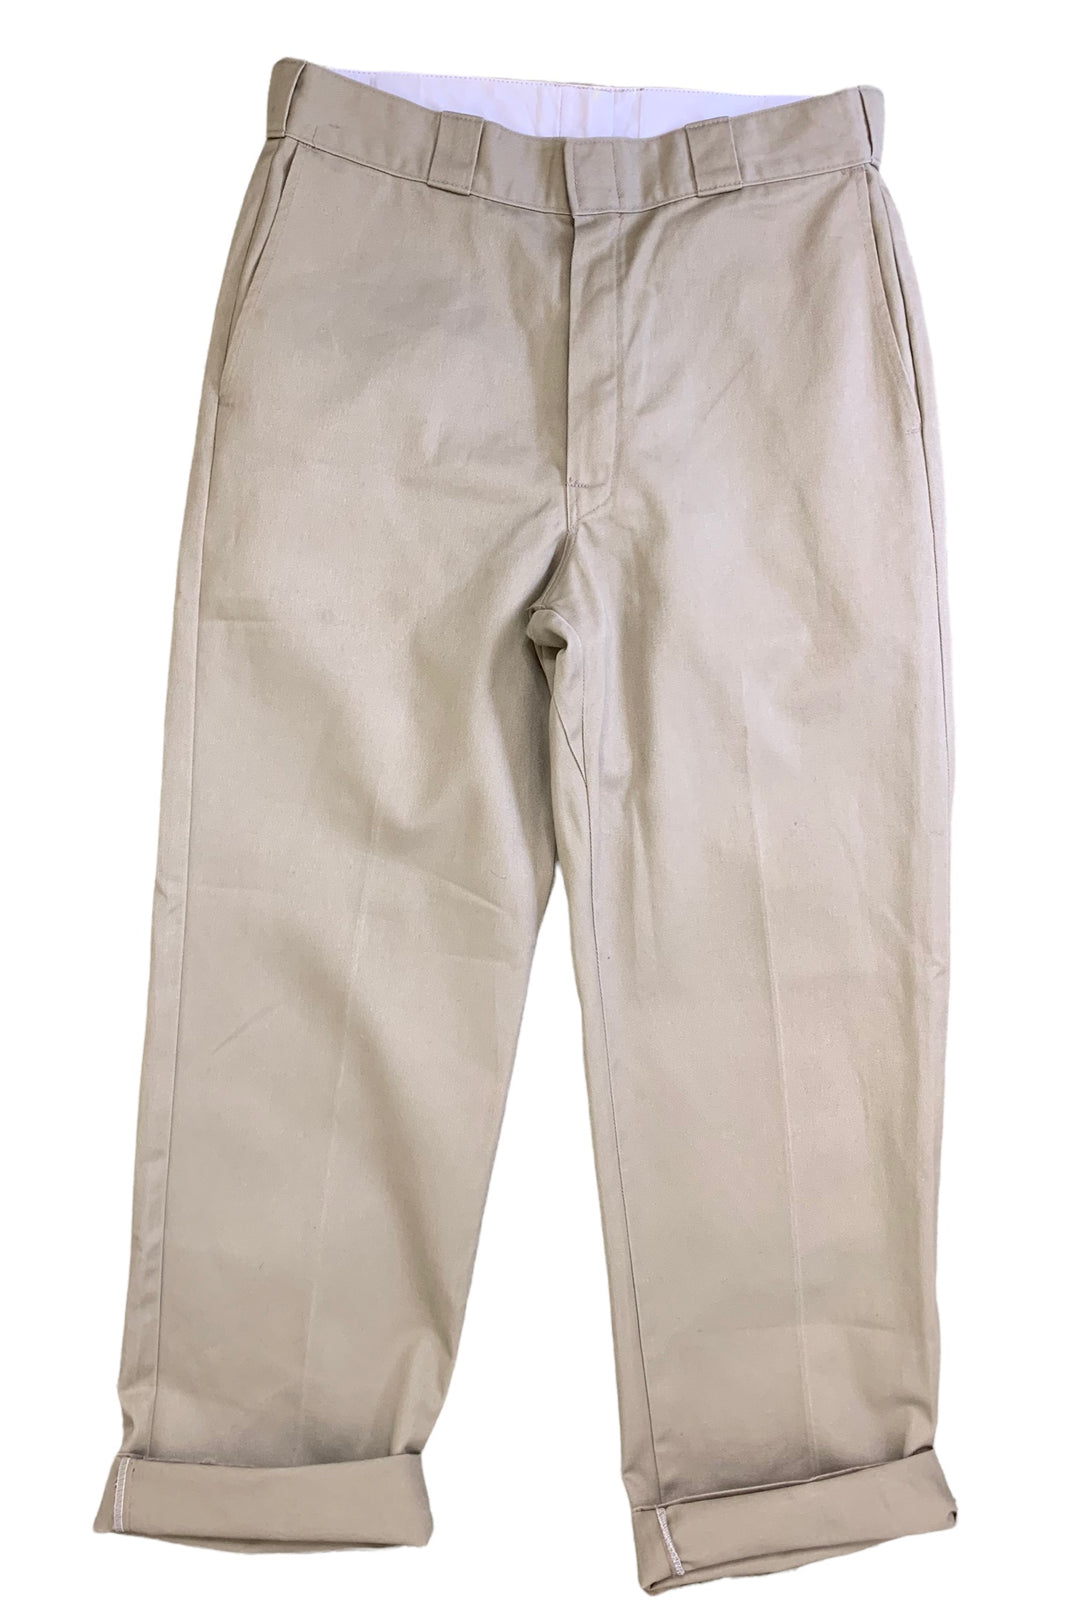 Highwaisted Chino Style Trousers